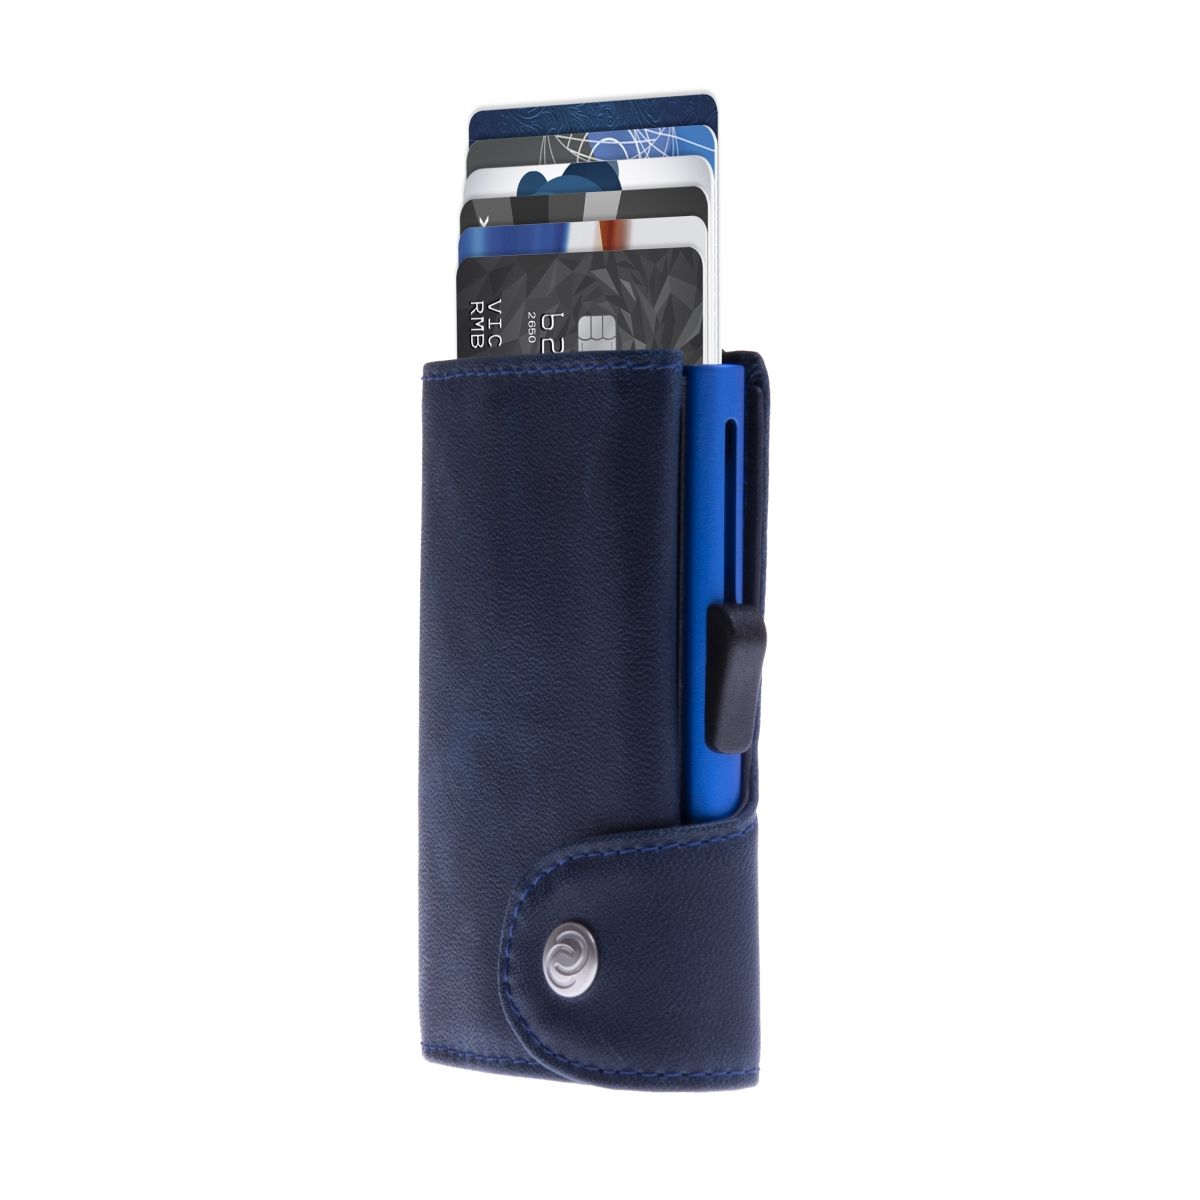 C-Secure Aluminum Card Holder with Genuine Leather - Navy Blue